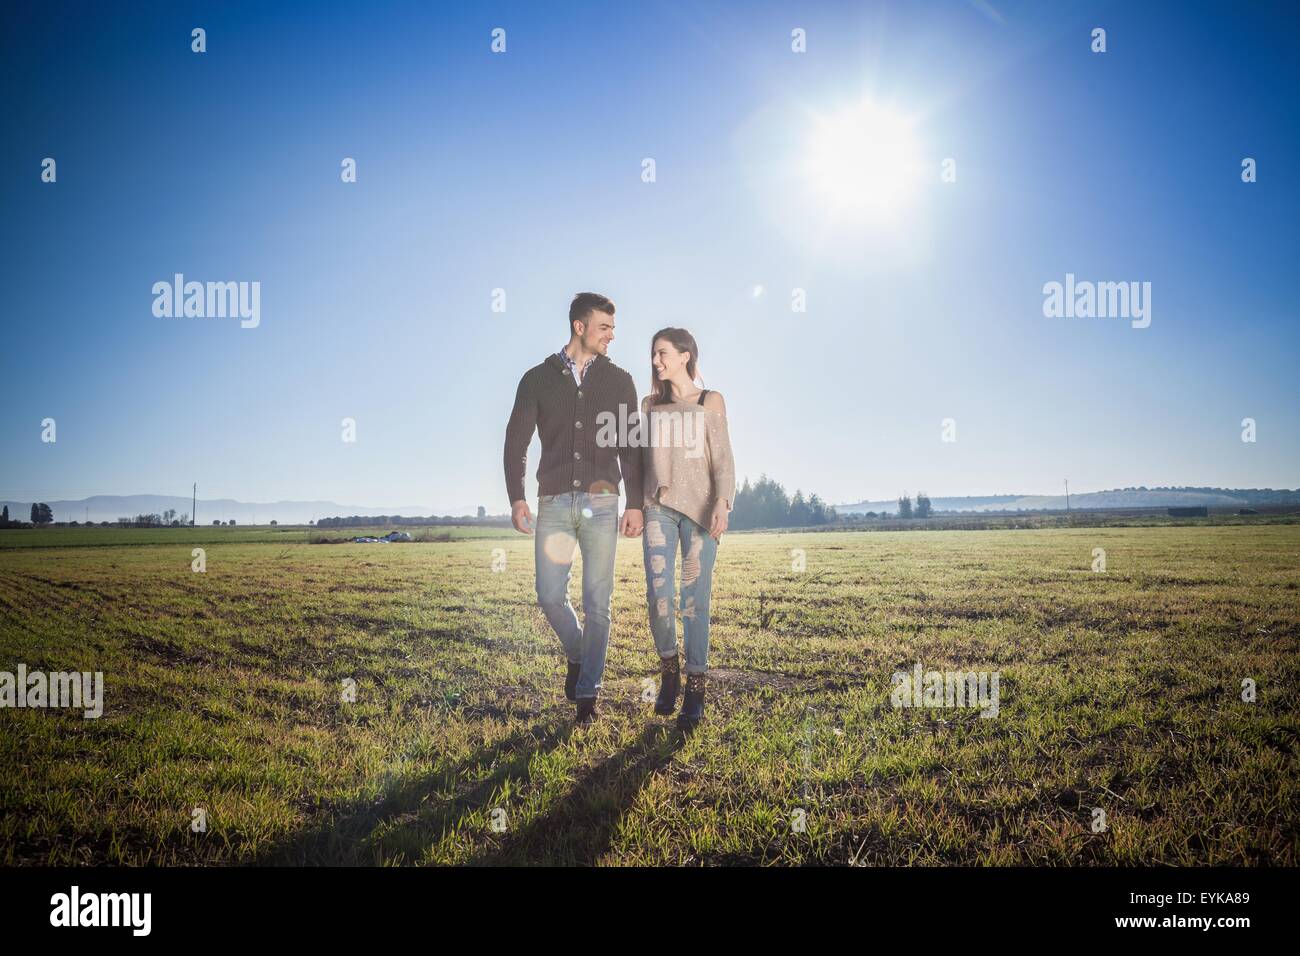 Young couple holding hands in field Banque D'Images